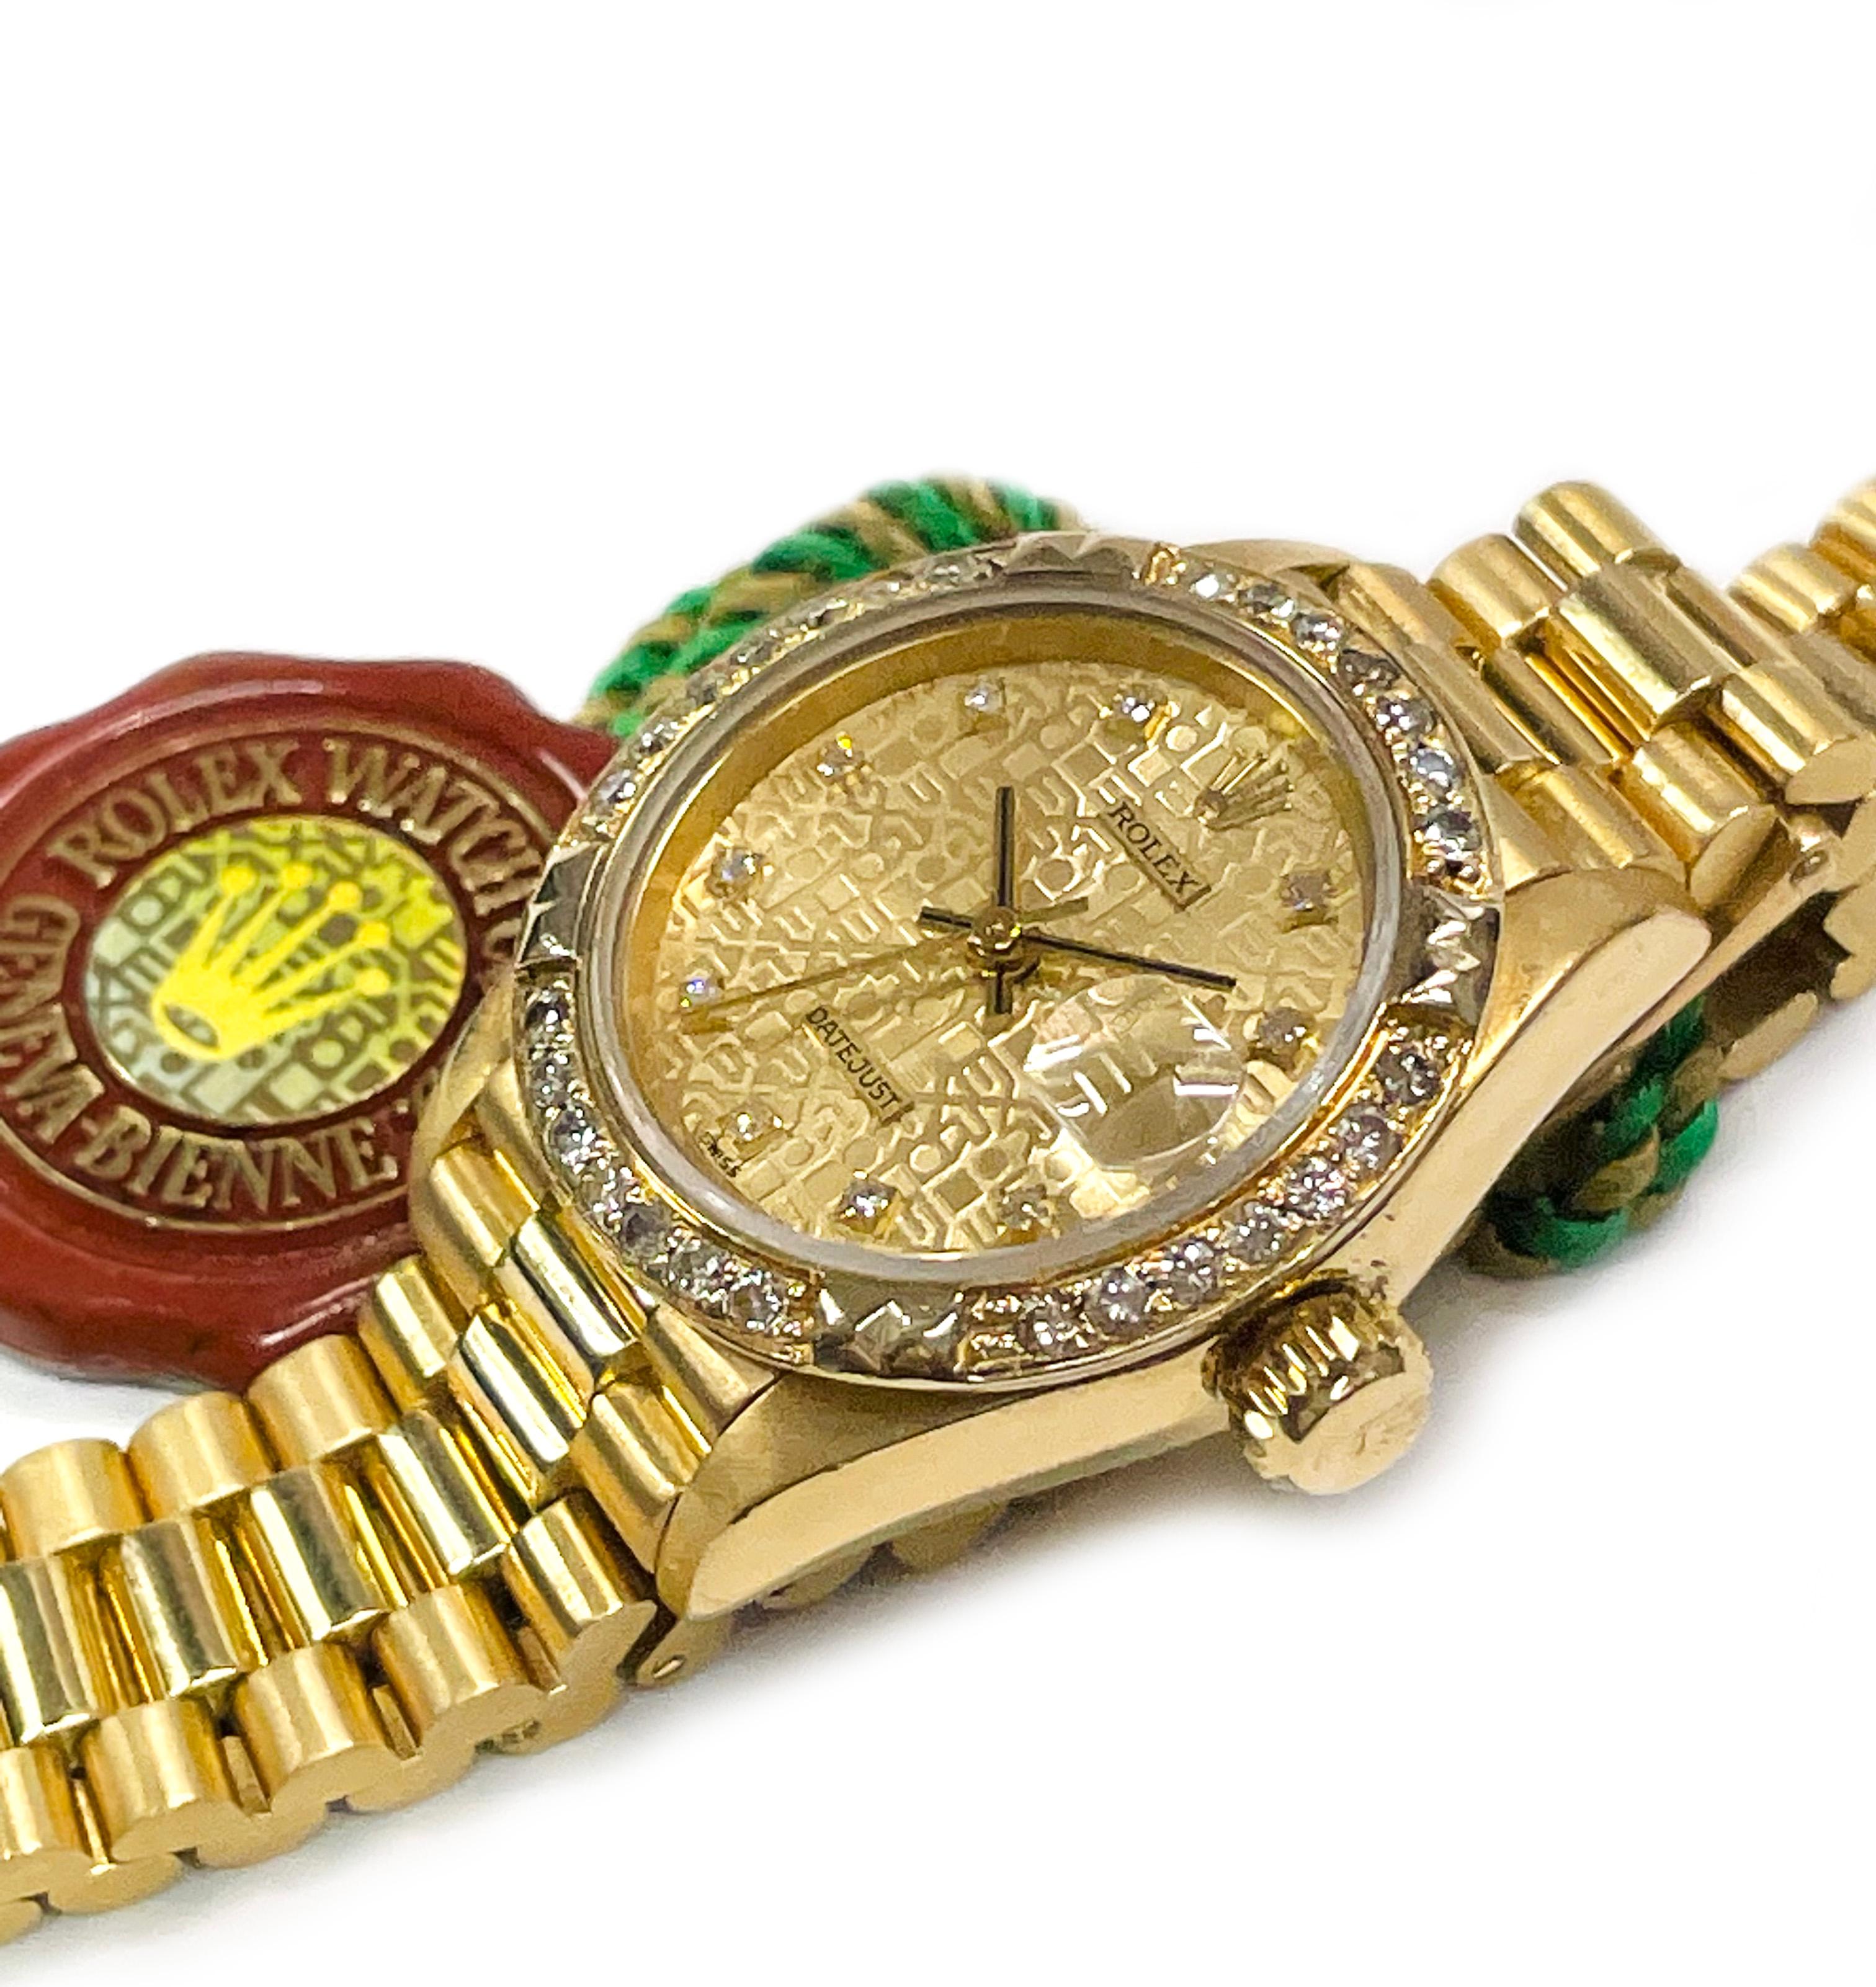 18 Karat Ladies Rolex Anniversary Datejust Diamond Bezel Watch. Stunning wristwatch with a gold dial, gold hour, minute, and second hand, diamond hours (except for the 12th hour), and diamond bezel. The ROLEX name is in a repeat pattern on the dial.